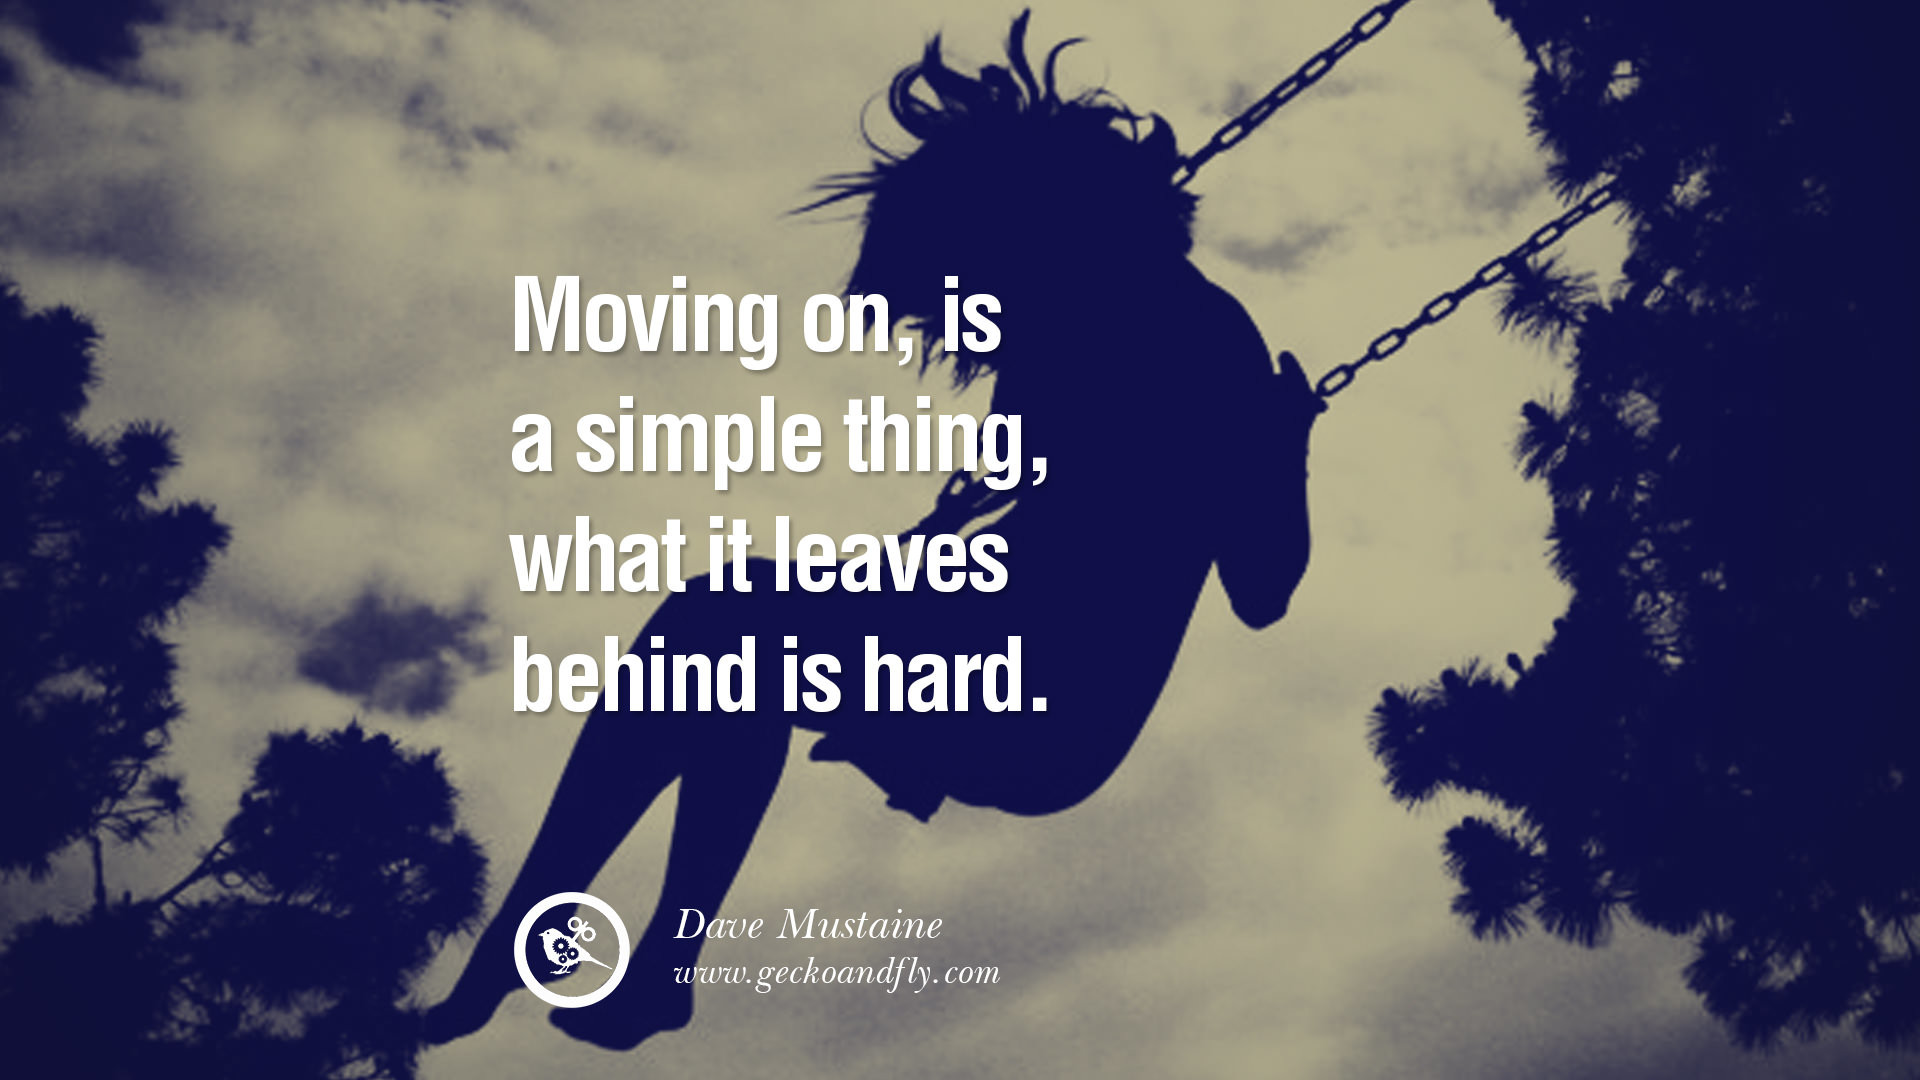 1920x1080 Moving on, is a simple thing, what it leaves behind is hard. -